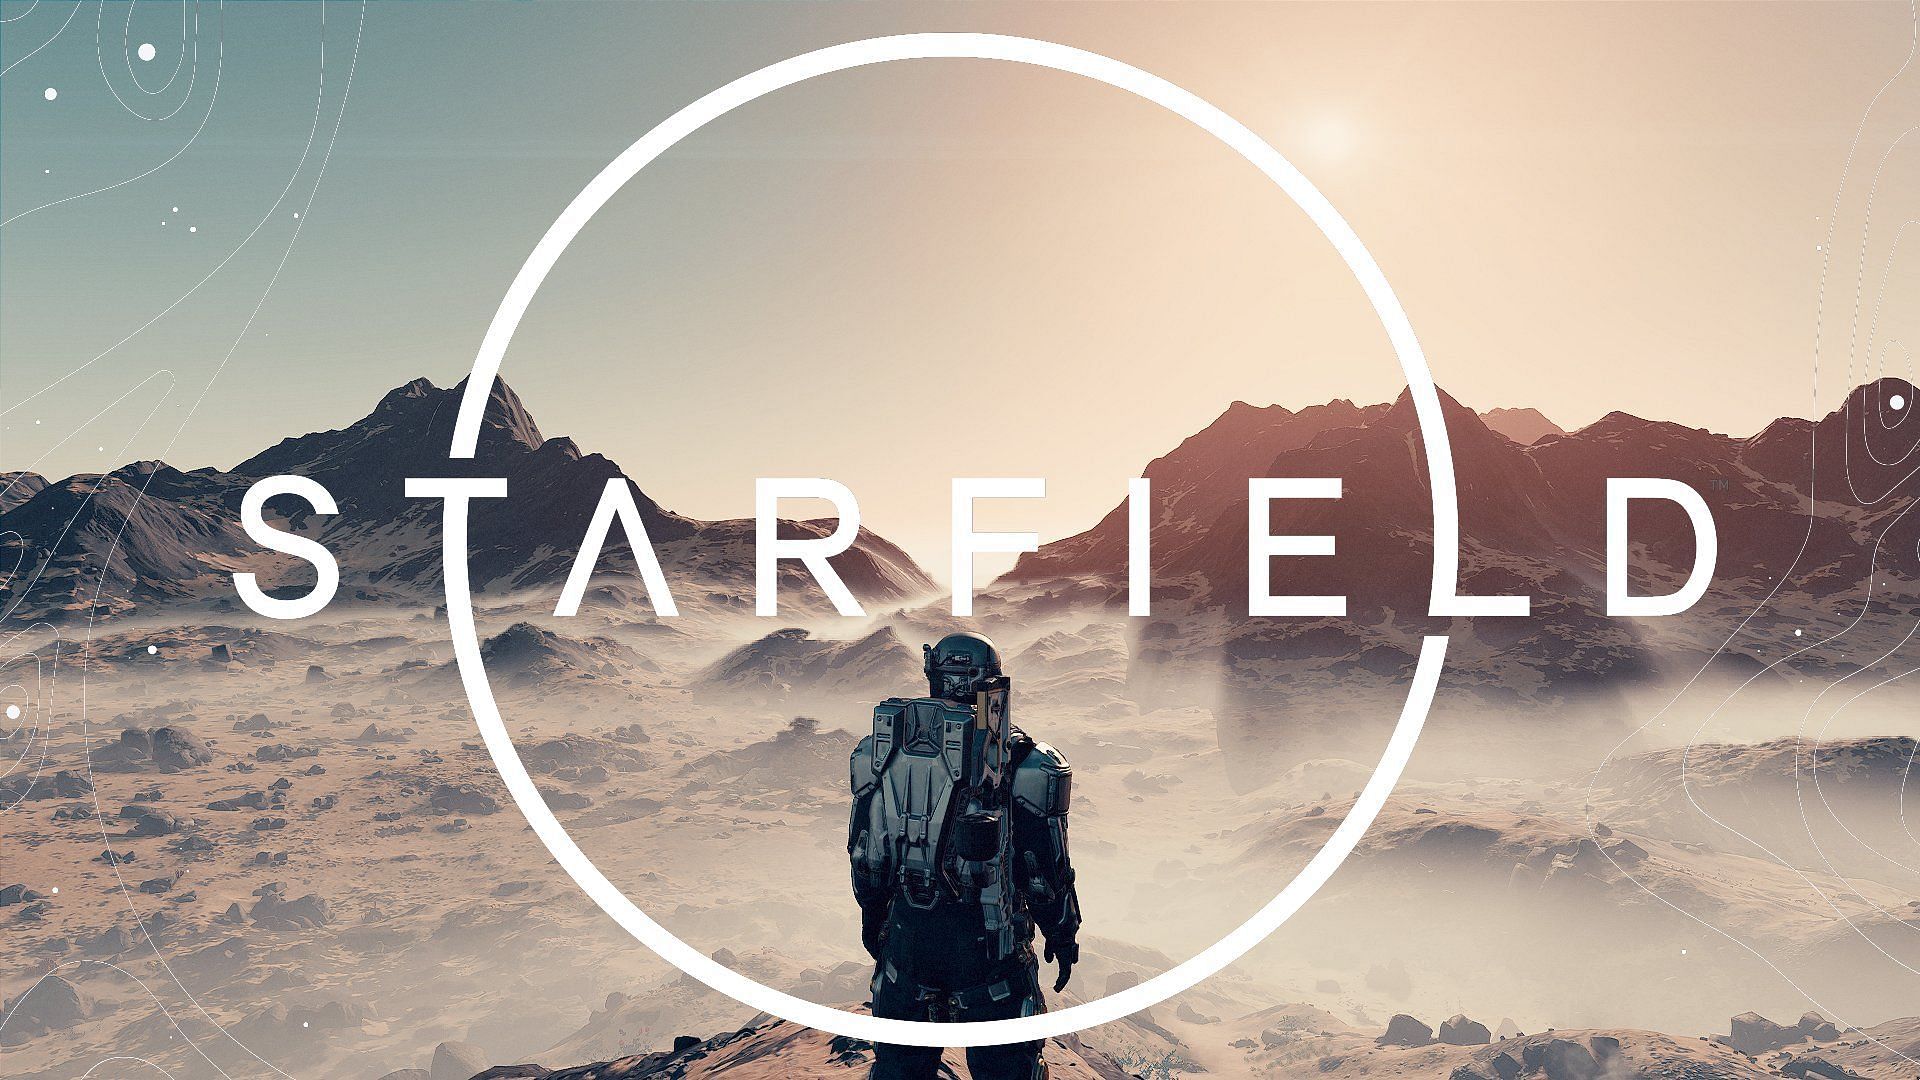 Starfield: How To Complete 'Deep Cover